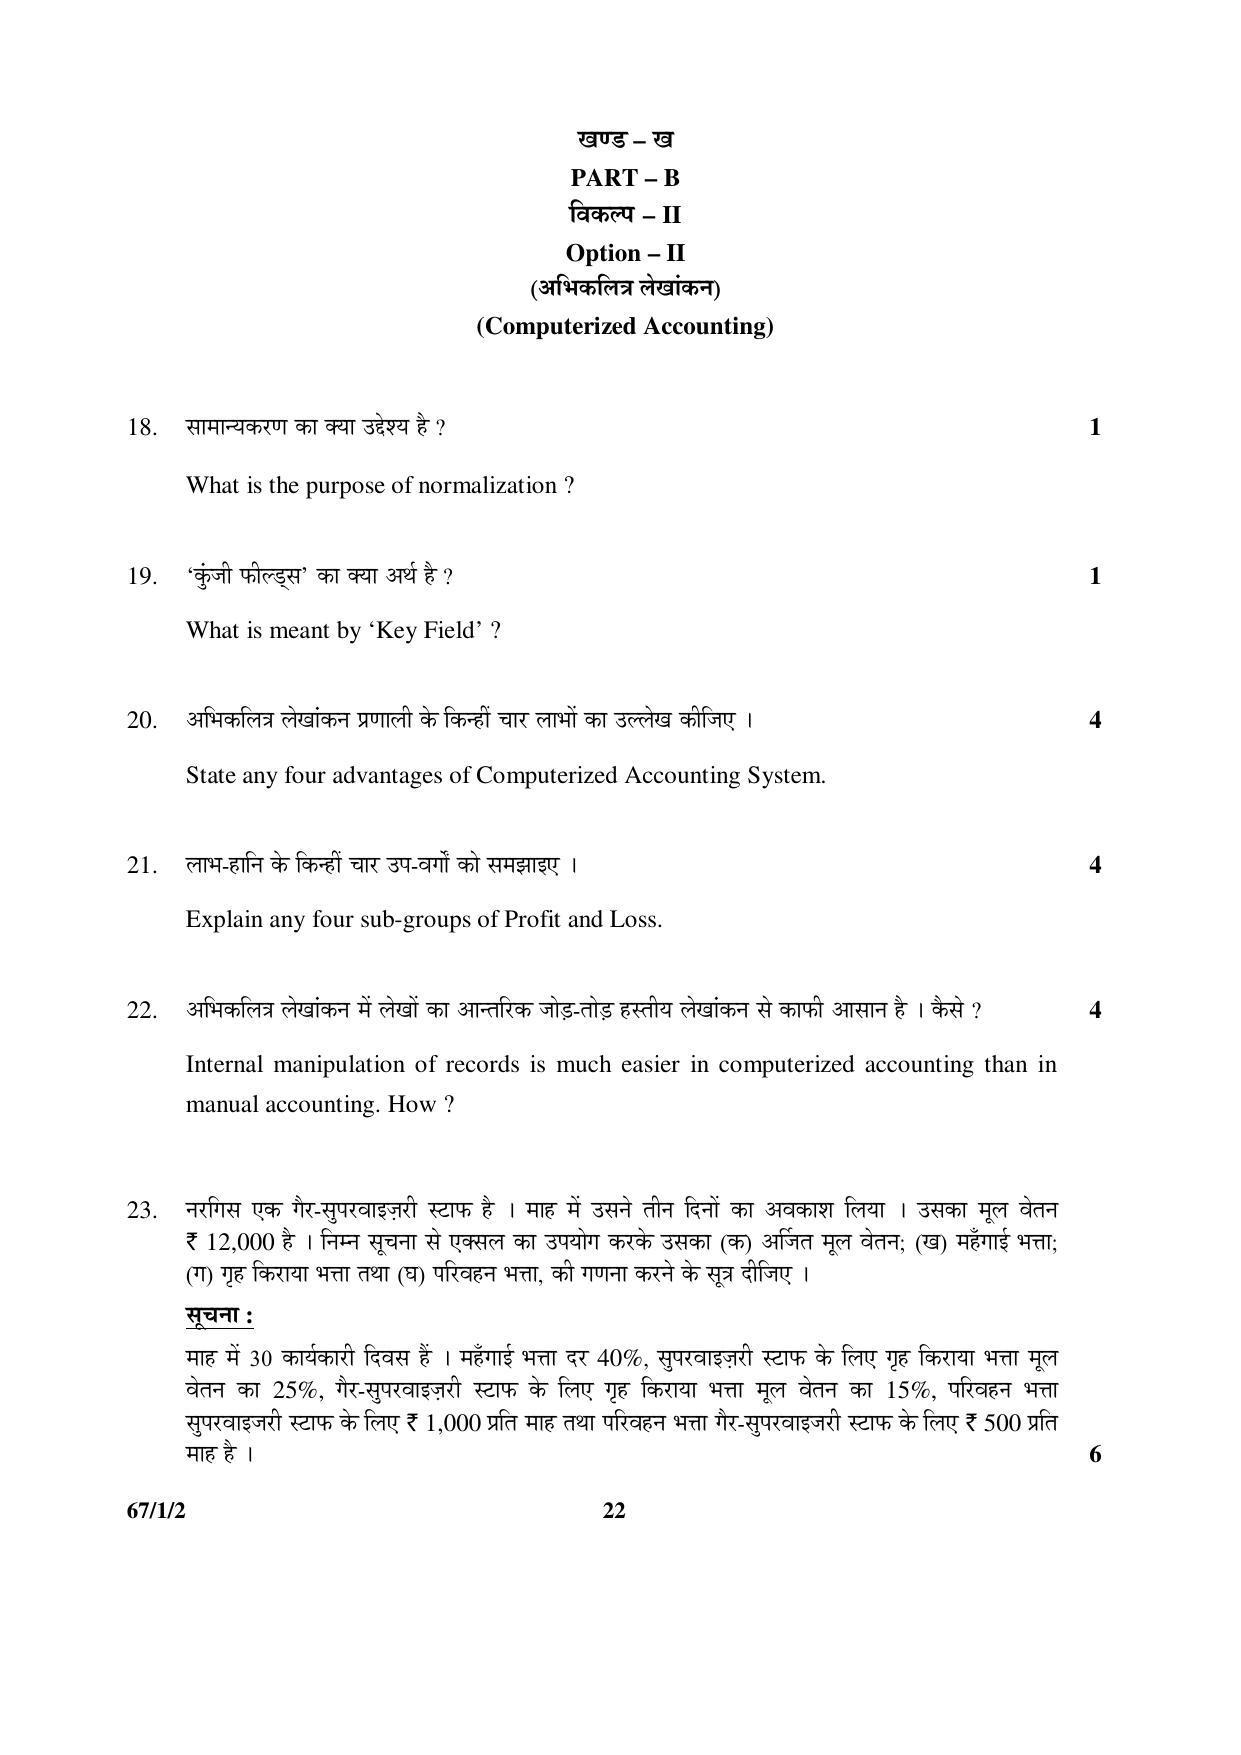 CBSE Class 12 67-1-2 ACCOUNTANCY 2016 Question Paper - Page 22